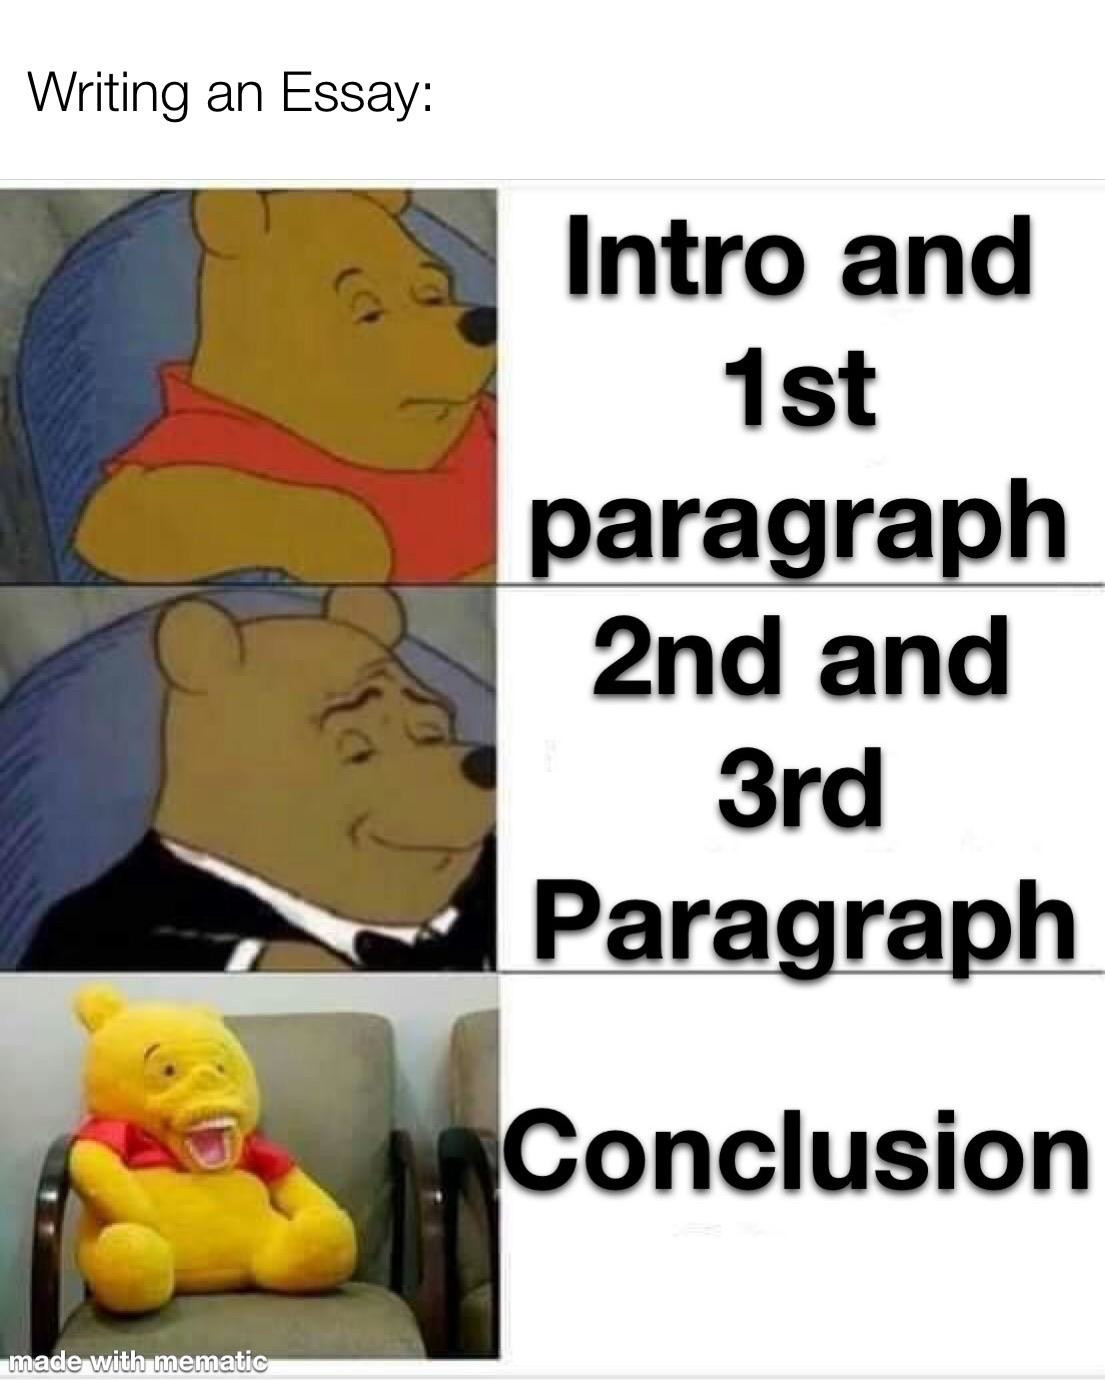 Essay writing memes - Students writing college essays relate to this